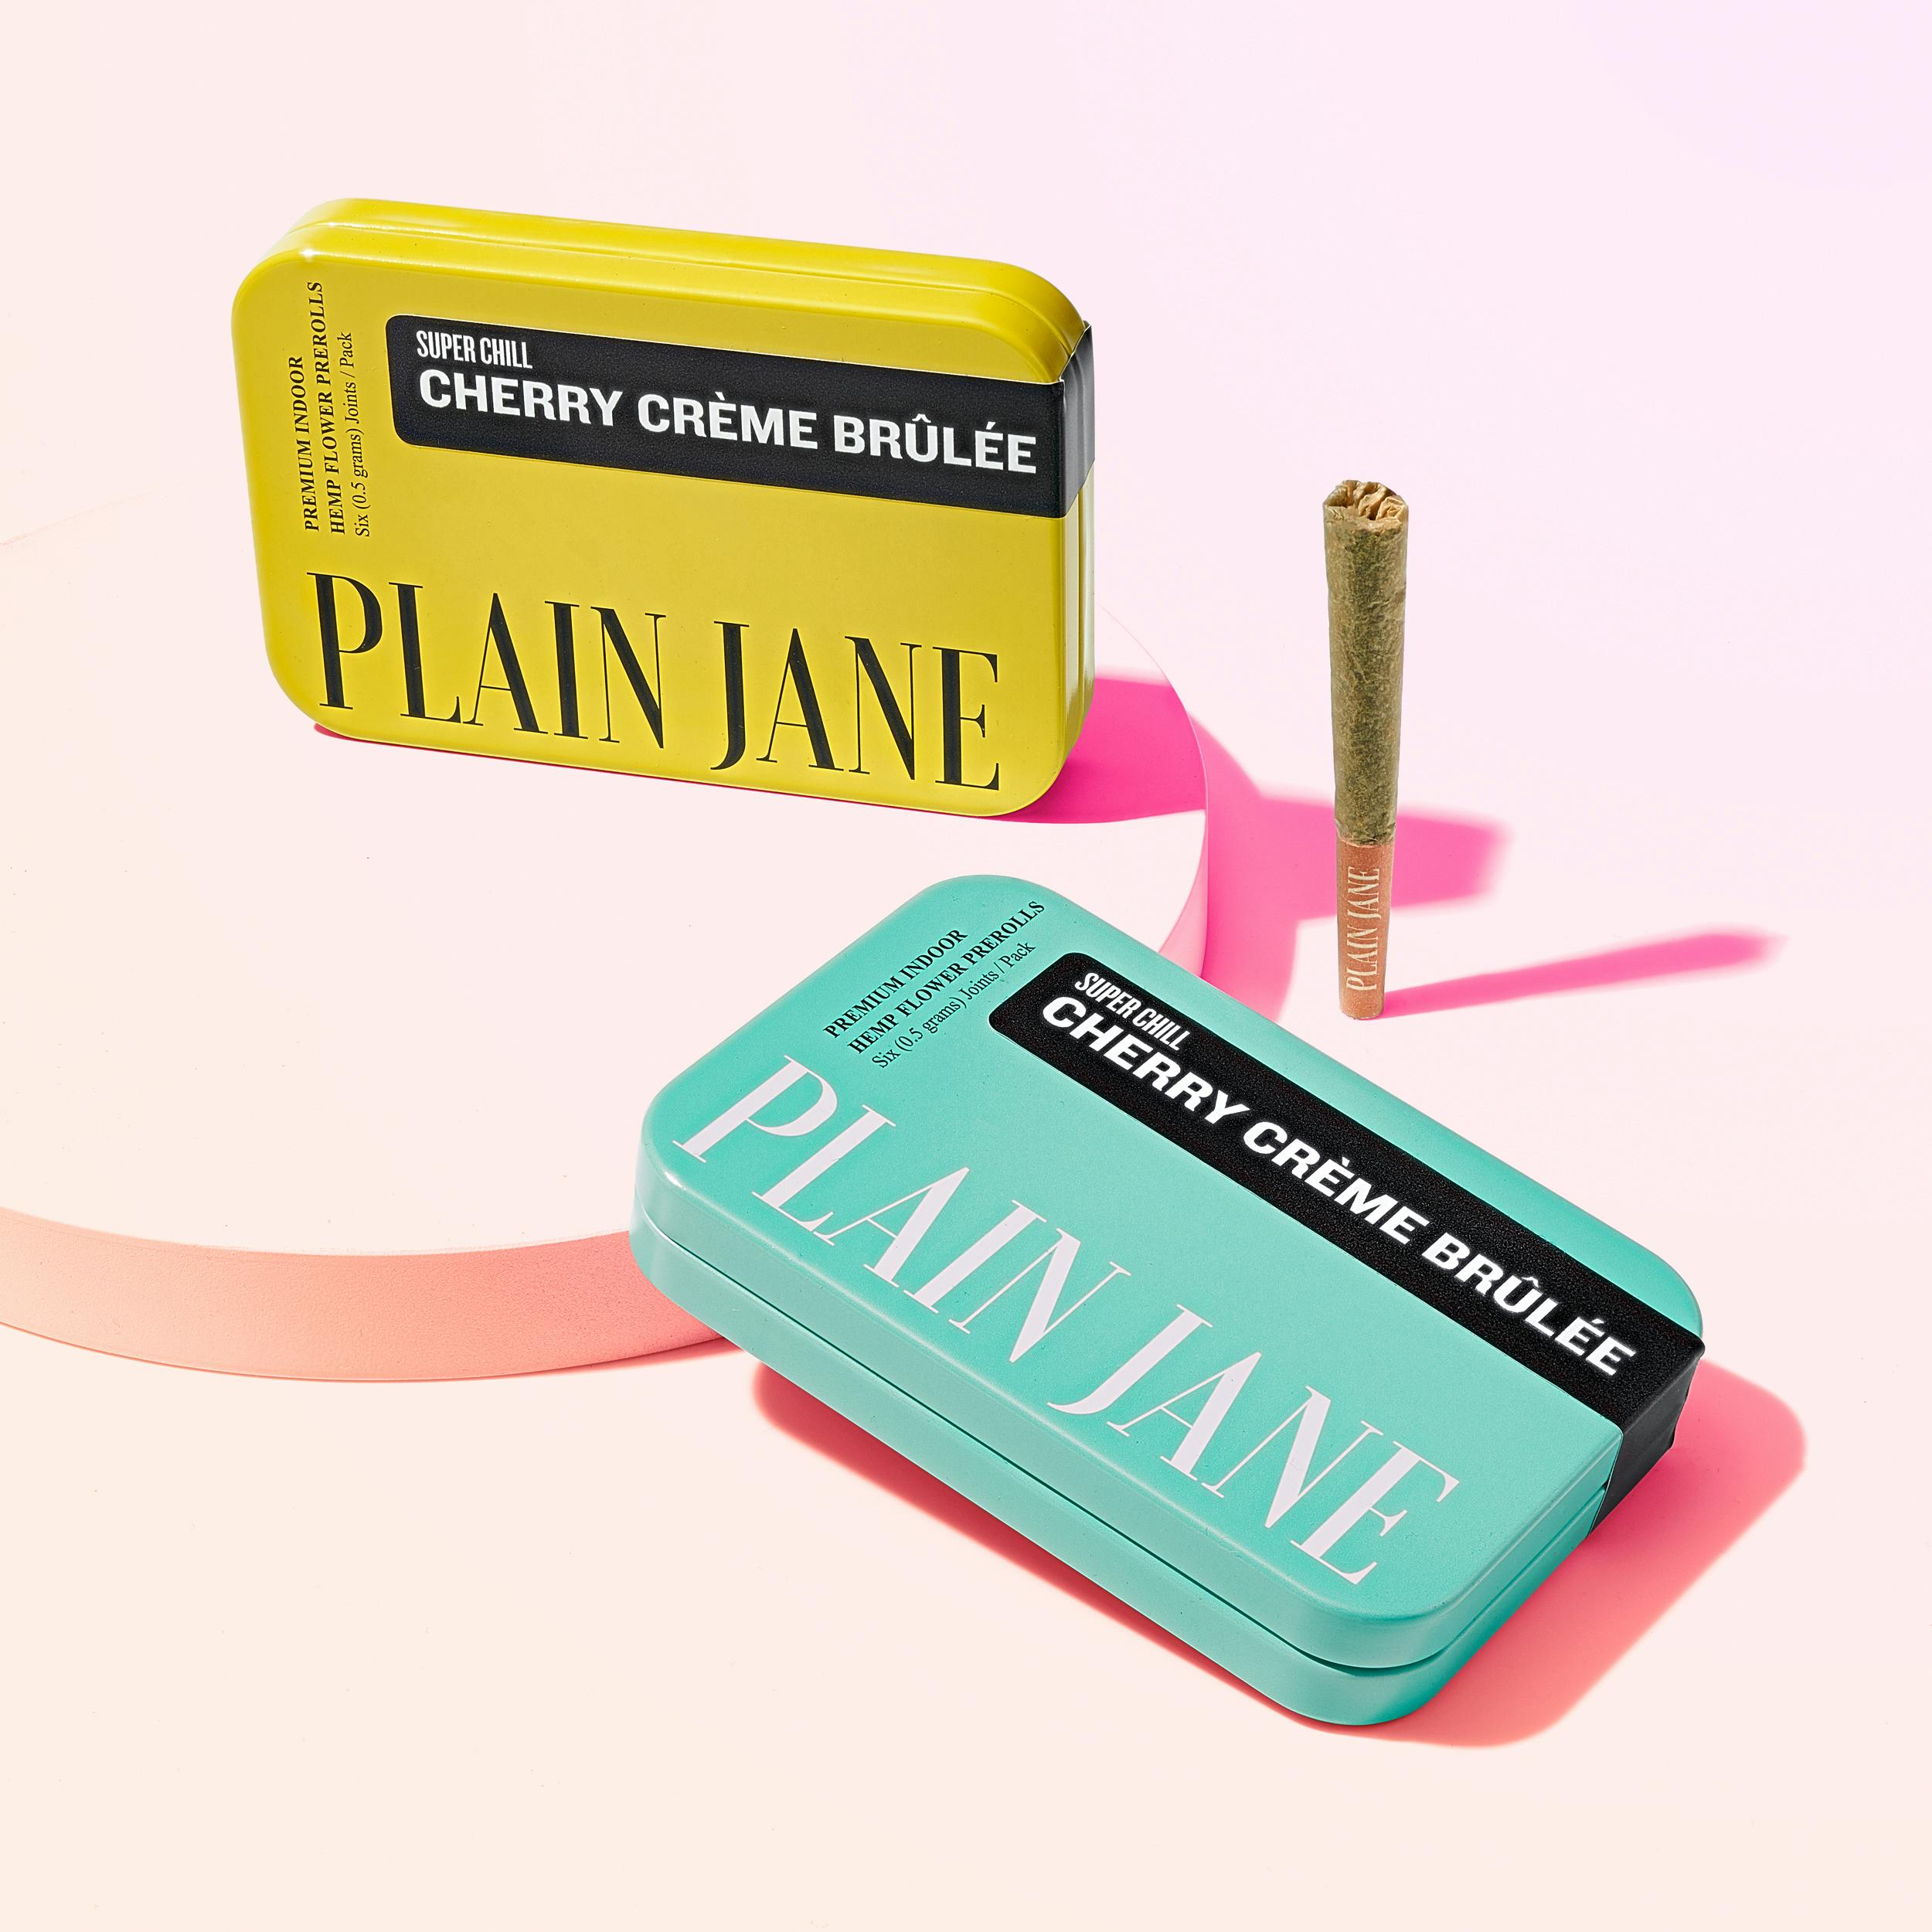 Plain Jane Cherry Creme Brulee 6 Pack Joints turquoise yellow tins group shot on white background with one joint on the outside  Flying With Weed: How To Get Cannabis Through Airport Security